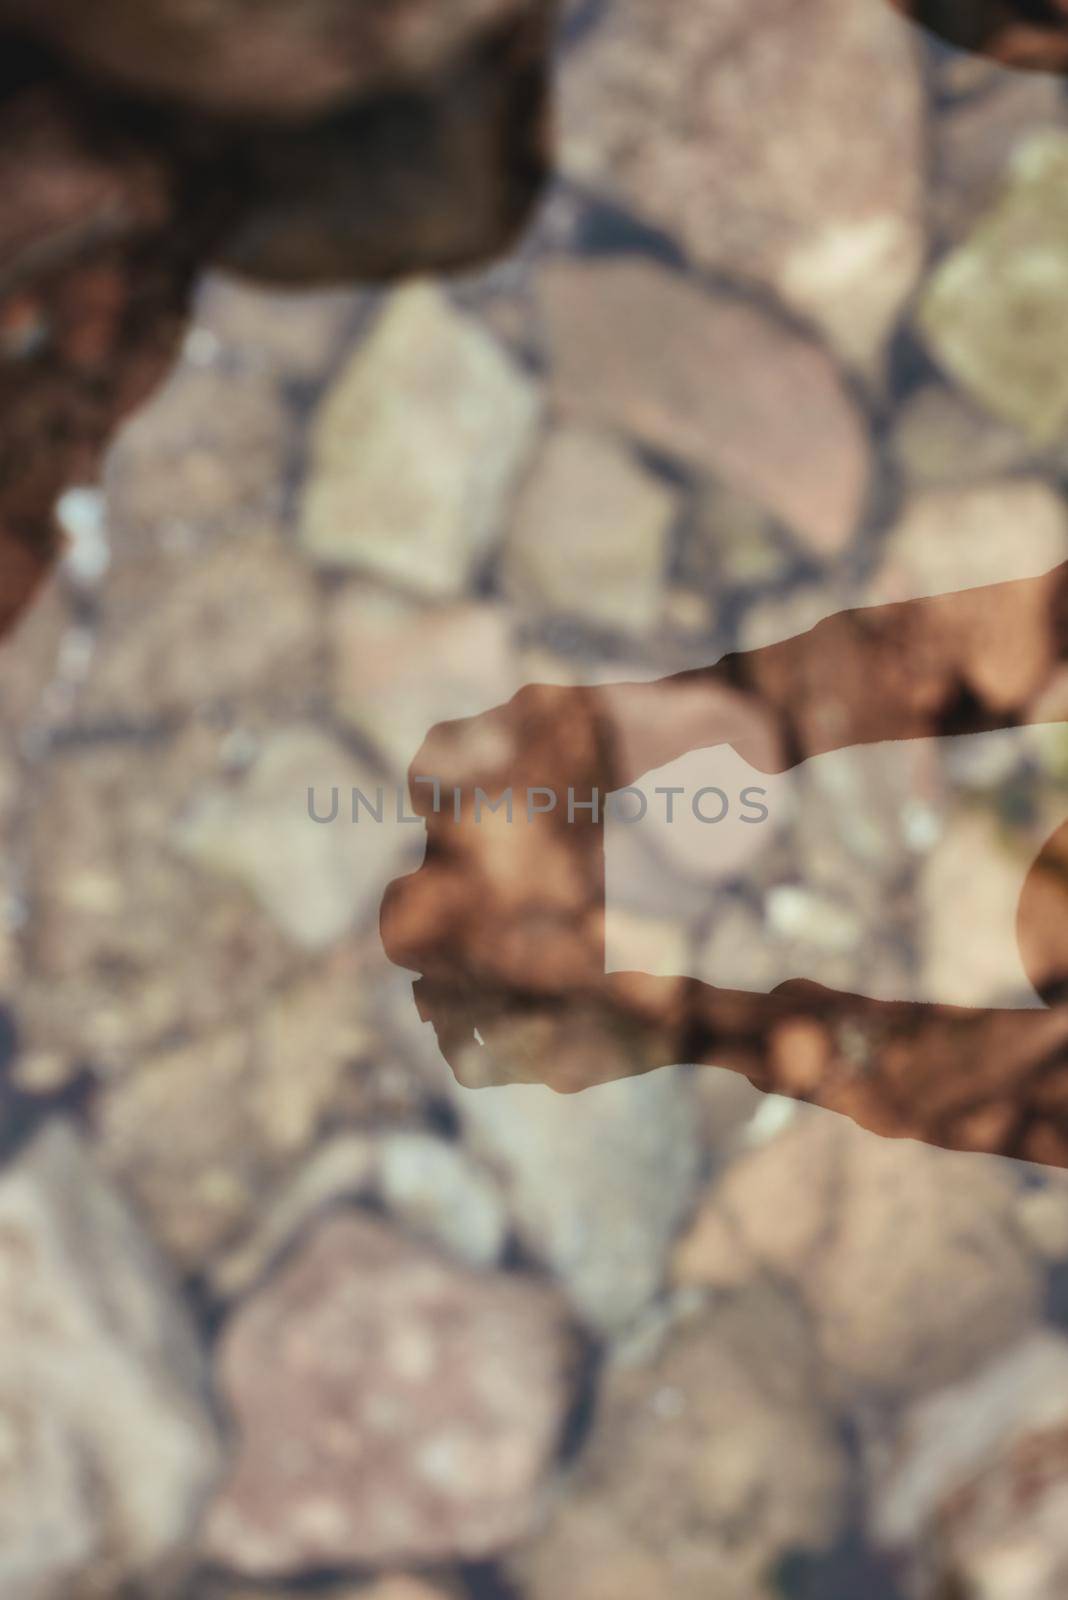 Shadow of the person holding photocamera. Reflection on the water with stones. Nature concept by friendsstock